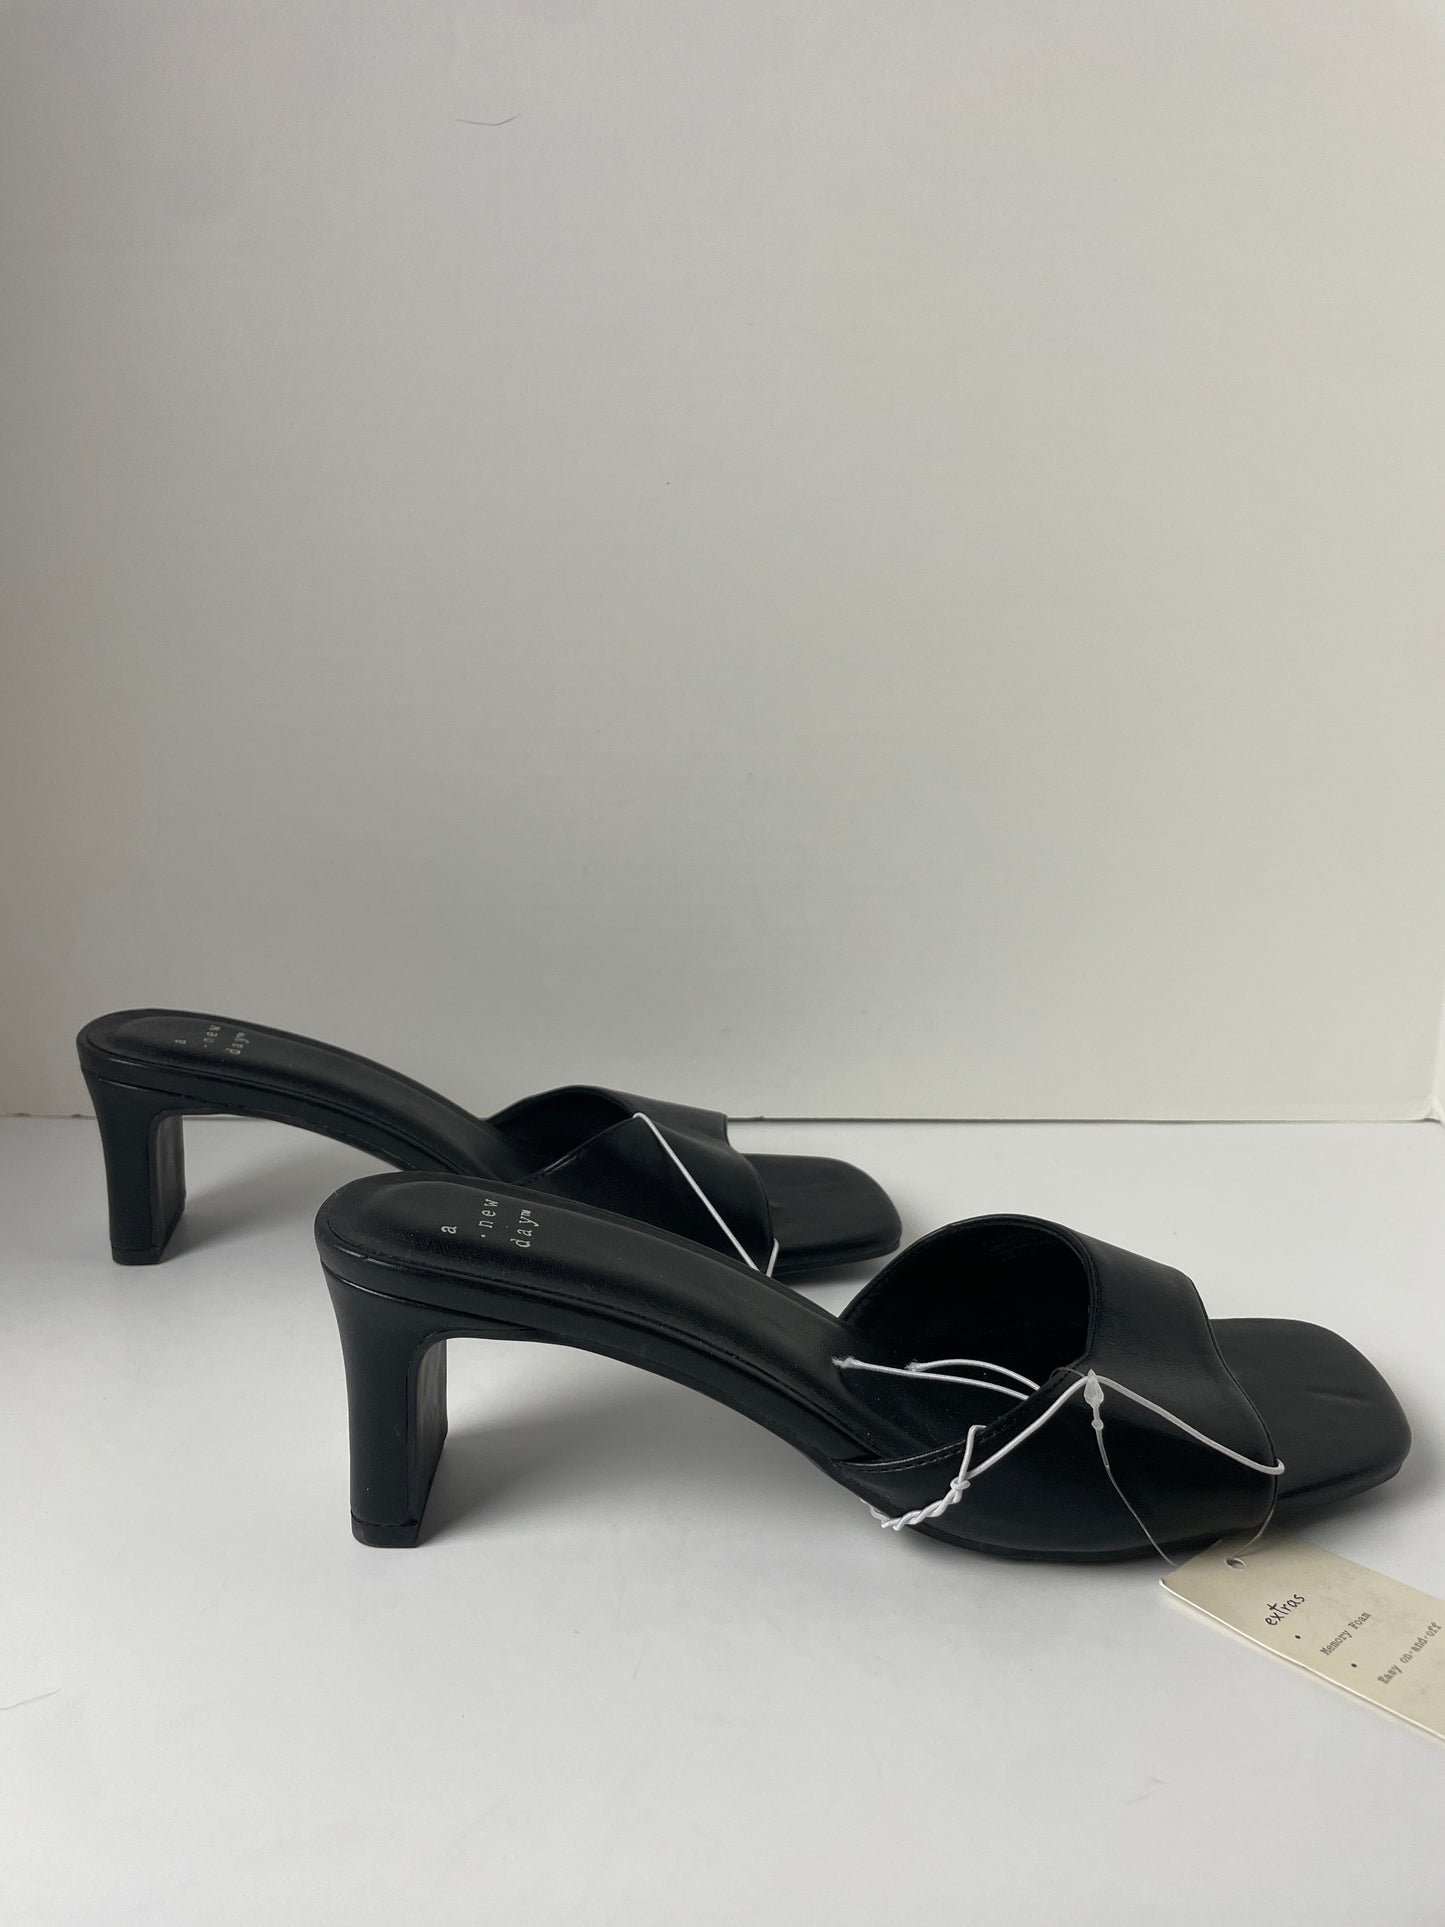 Black Shoes Heels Kitten A New Day, Size 9